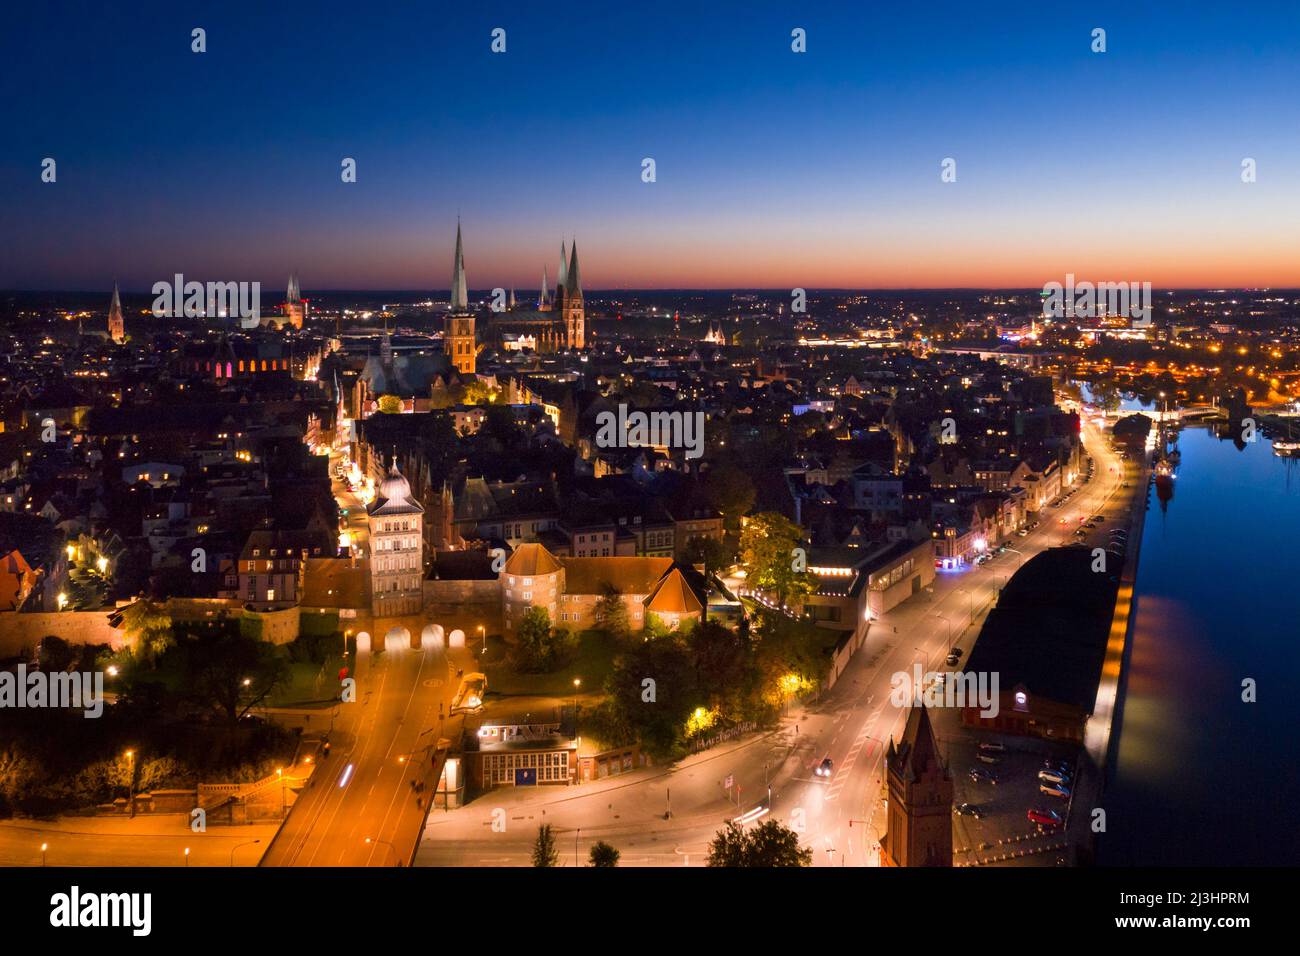 Aerial view over the Burgtor, river Trave and old town and churches of the Hanseatic City of Lübeck at night, Schleswig-Holstein, Germany Stock Photo